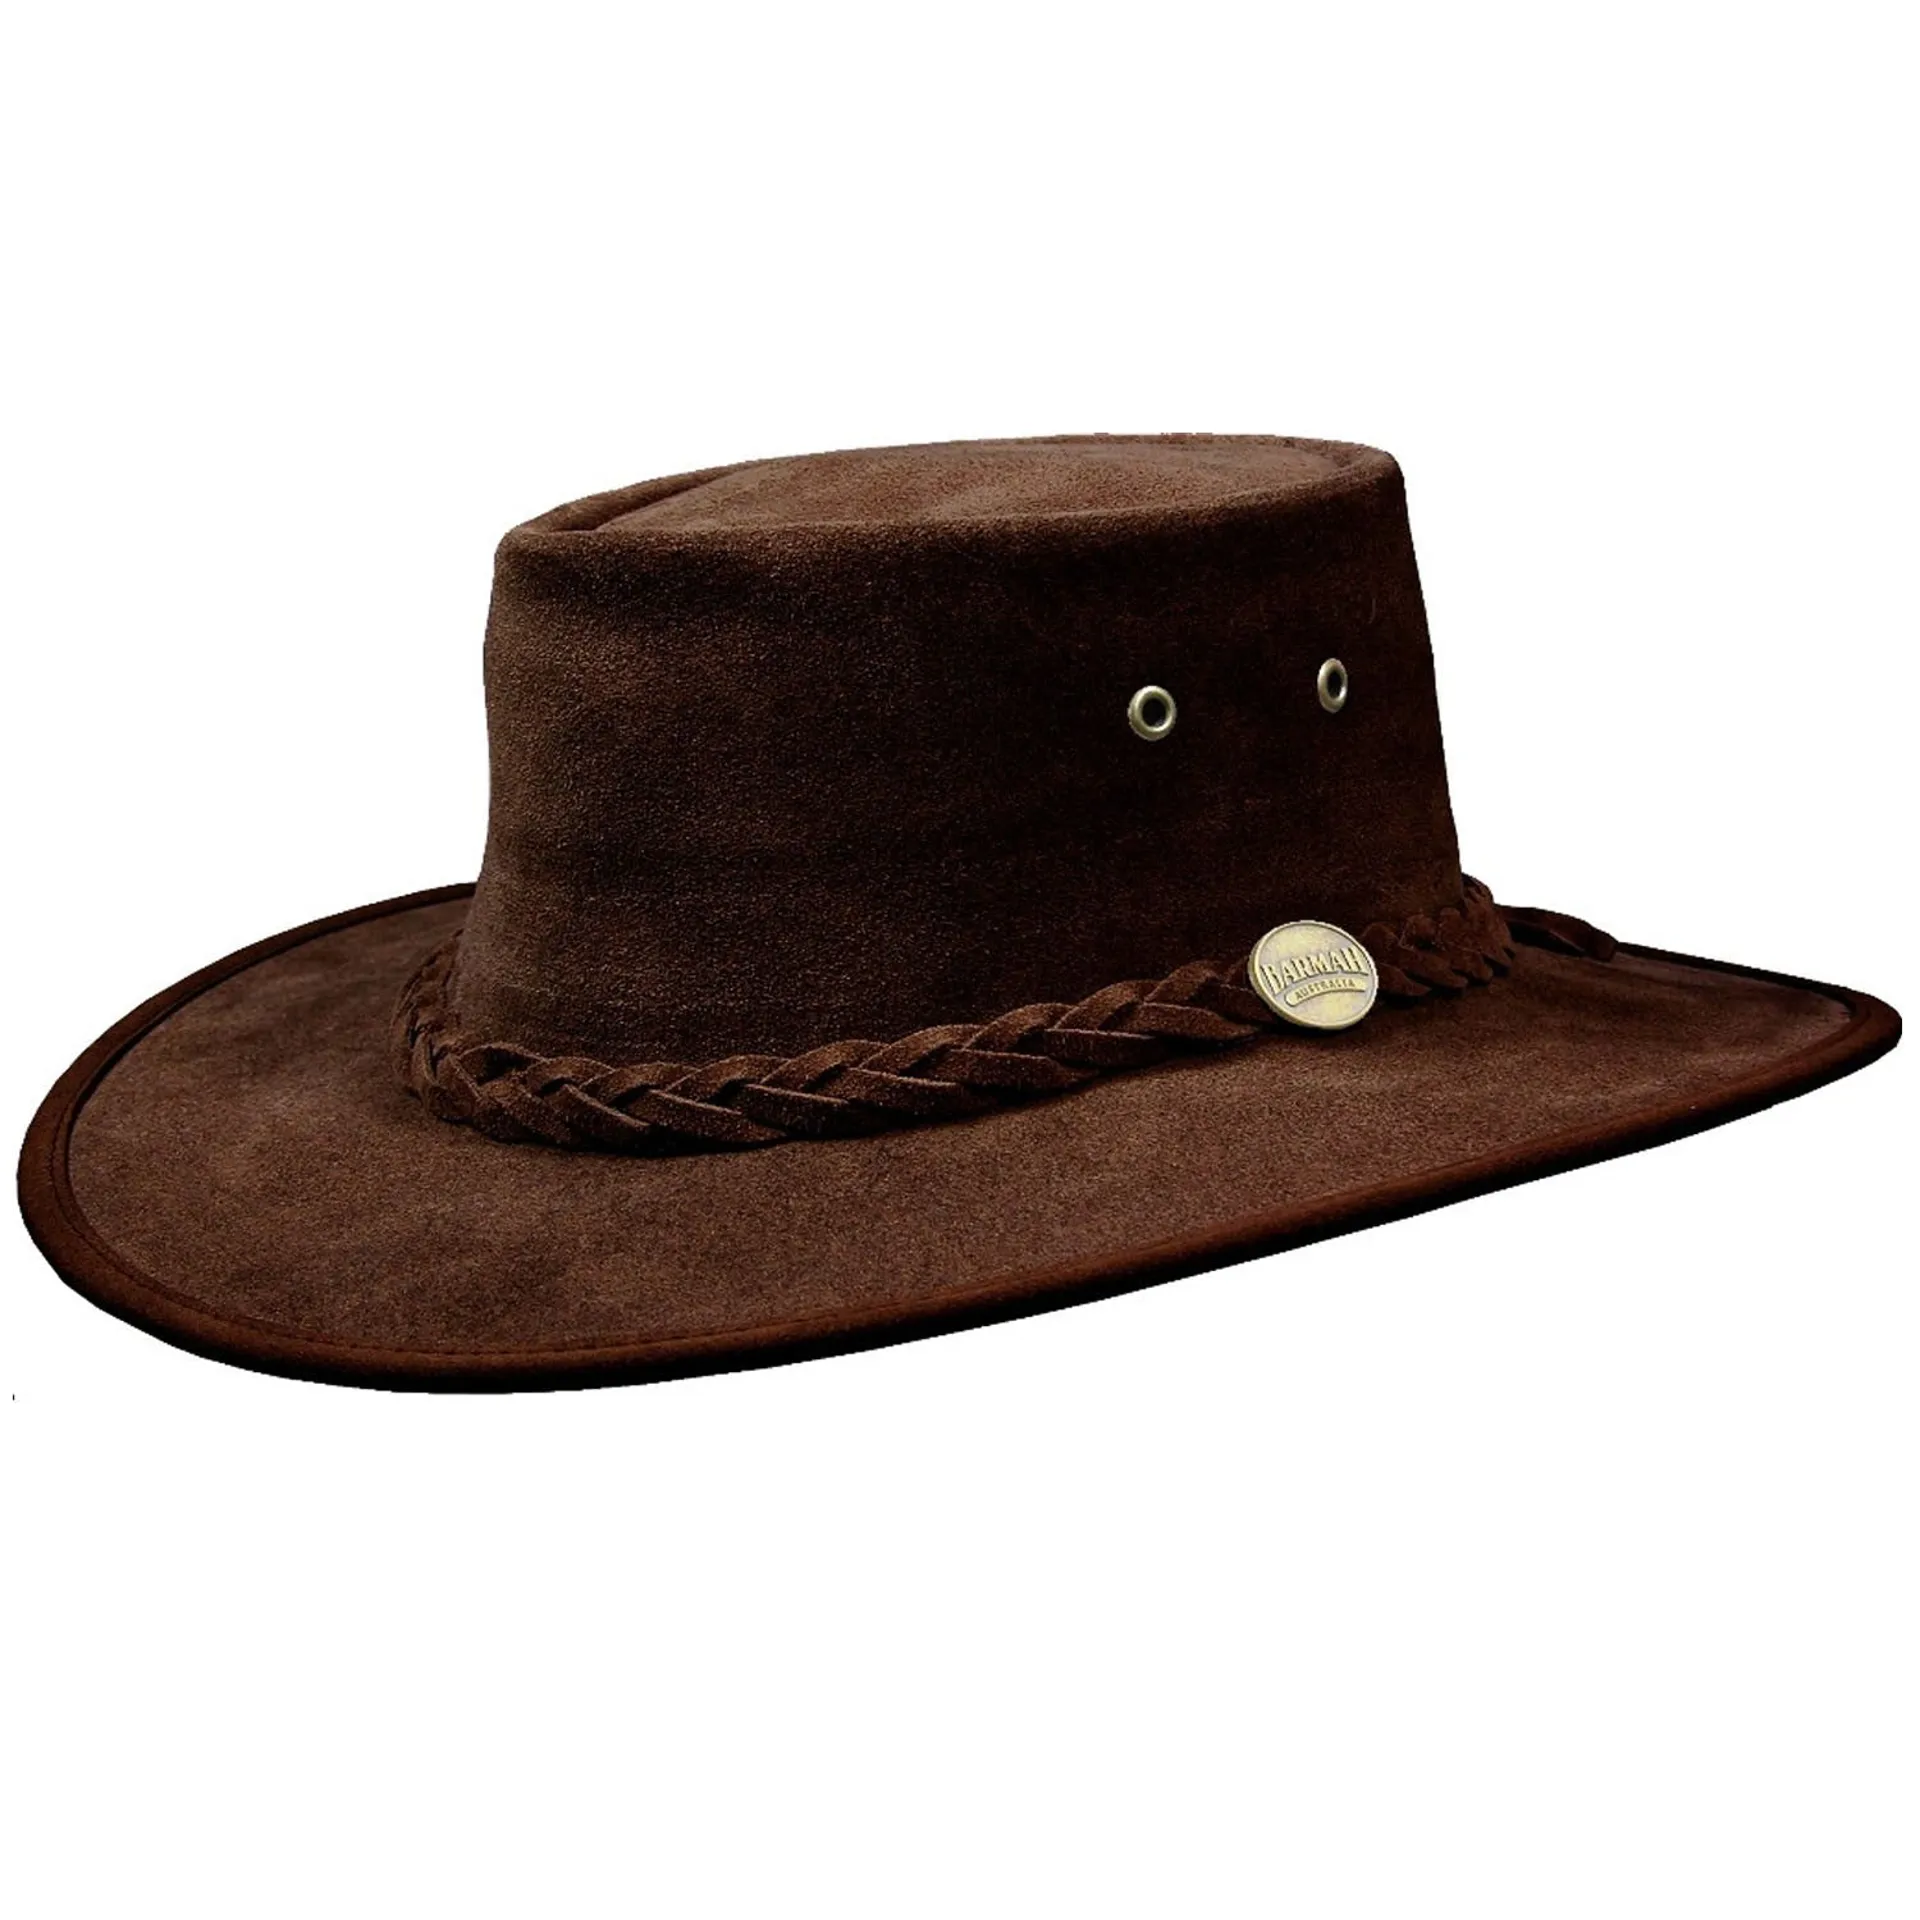 https://www.randrcountry.com/images/products/b/ba/barmah-hats-1025-suede-squashy-hat__4985.jpg?width=1920&format=webp